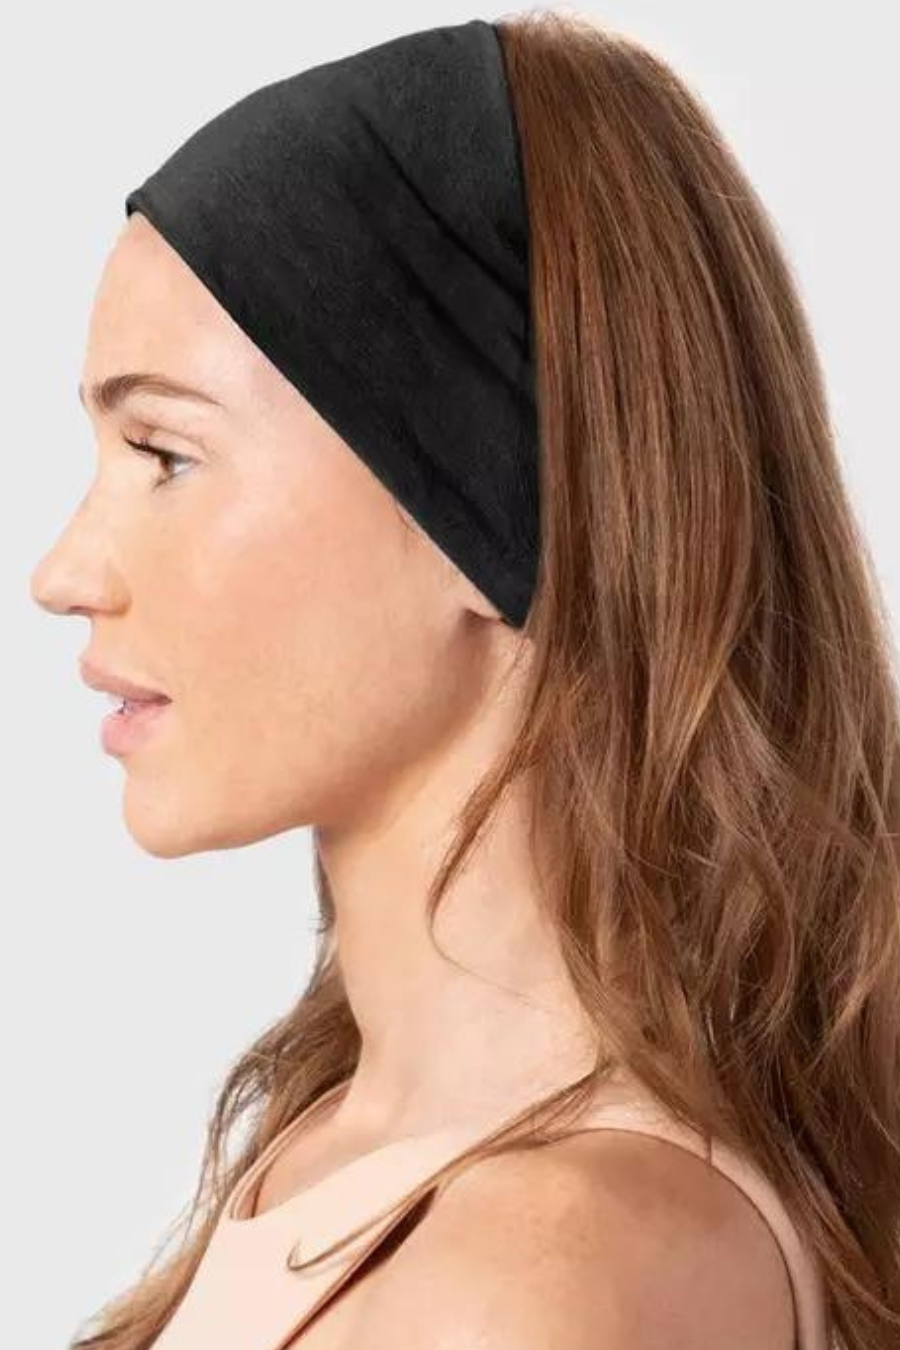 girl with hair down and pulled back by black fabric headband 